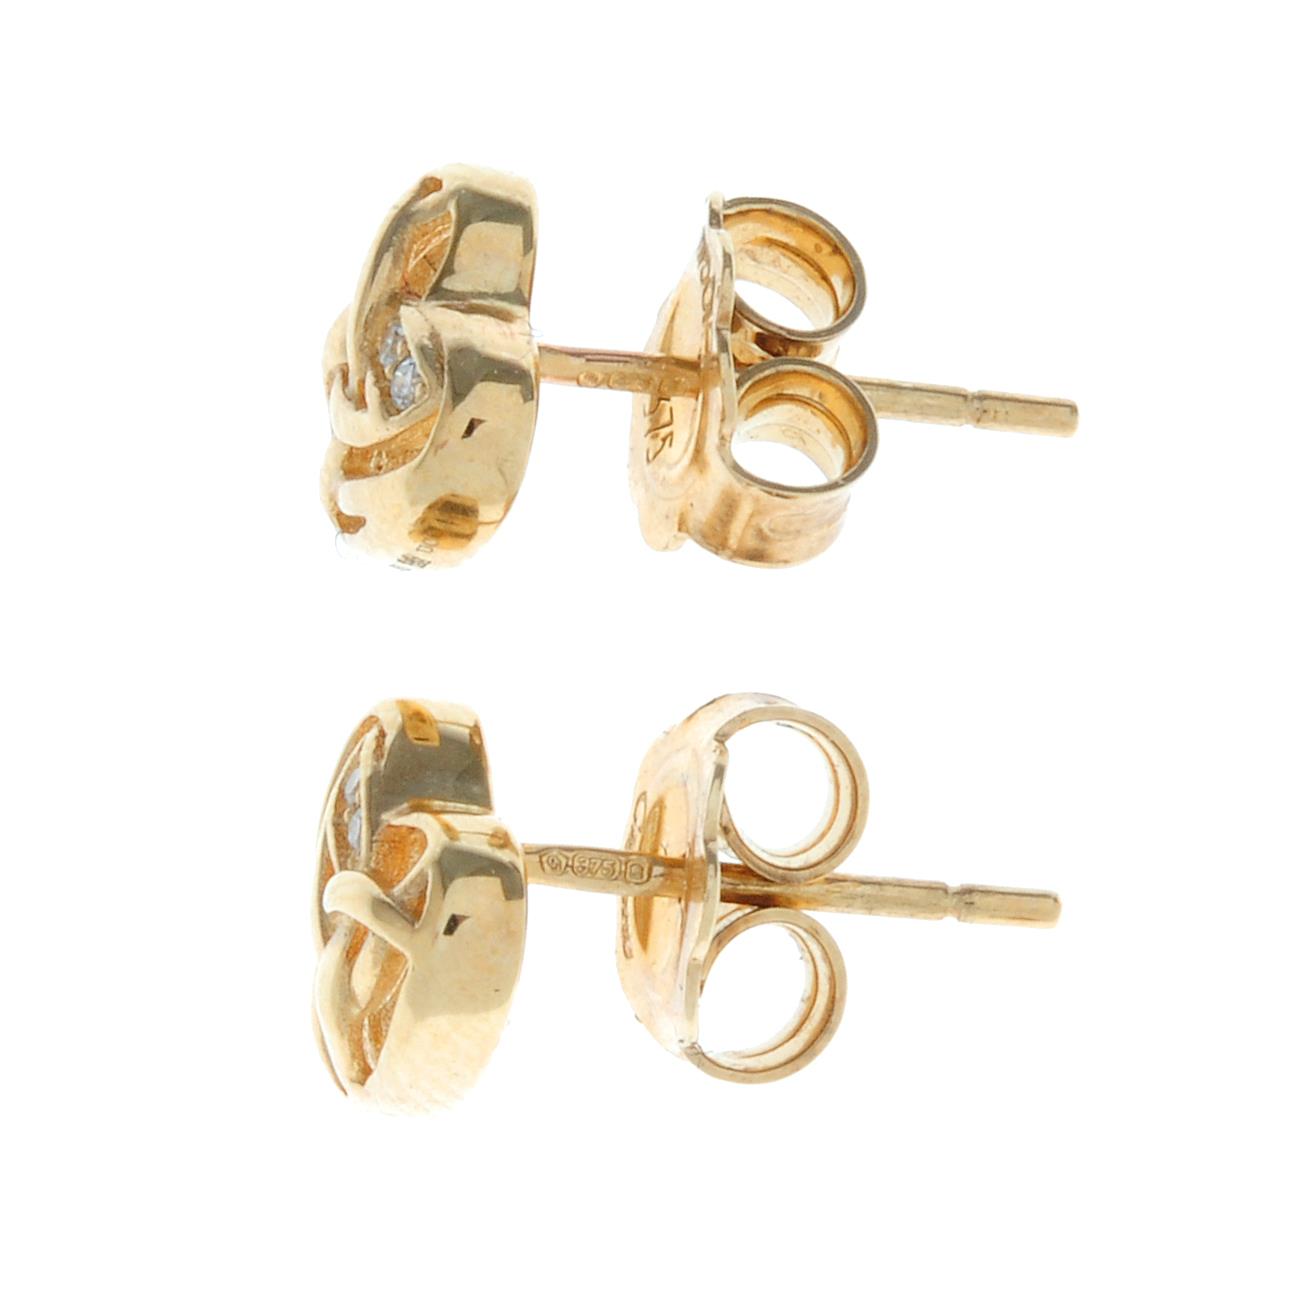 A pair of 9ct gold diamond stud heart earrings, by Clogau.Signed Clogau. - Image 2 of 2